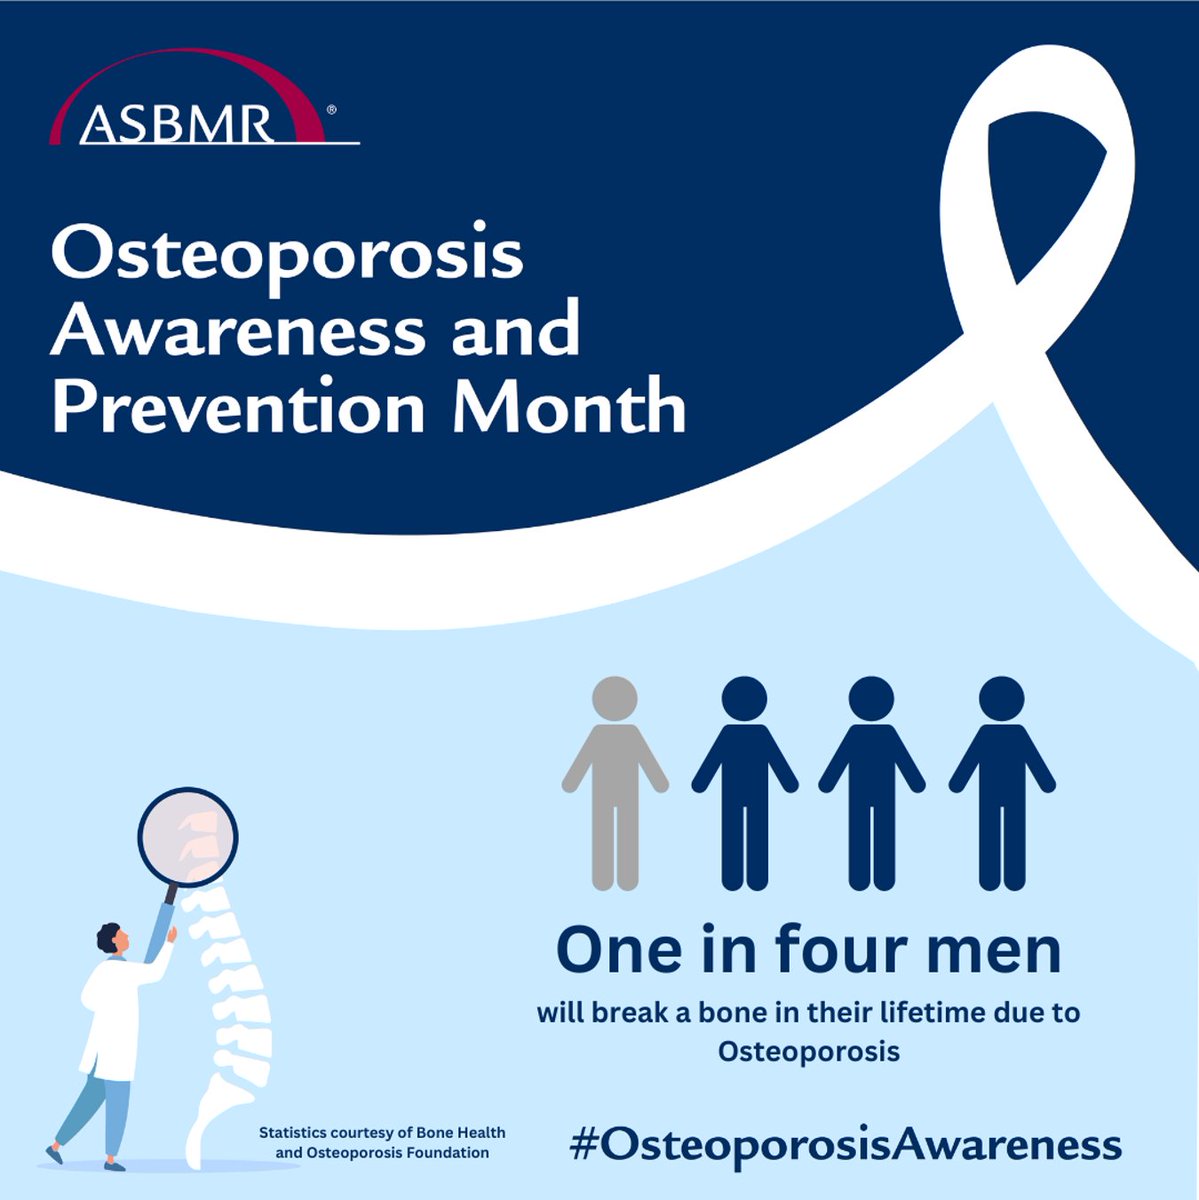 Osteoporosis impacts millions of Americans. According to @bonehealthBHOF, one in two women and one in four men will break a bone due to osteoporosis. #OsteoporosisAwareness